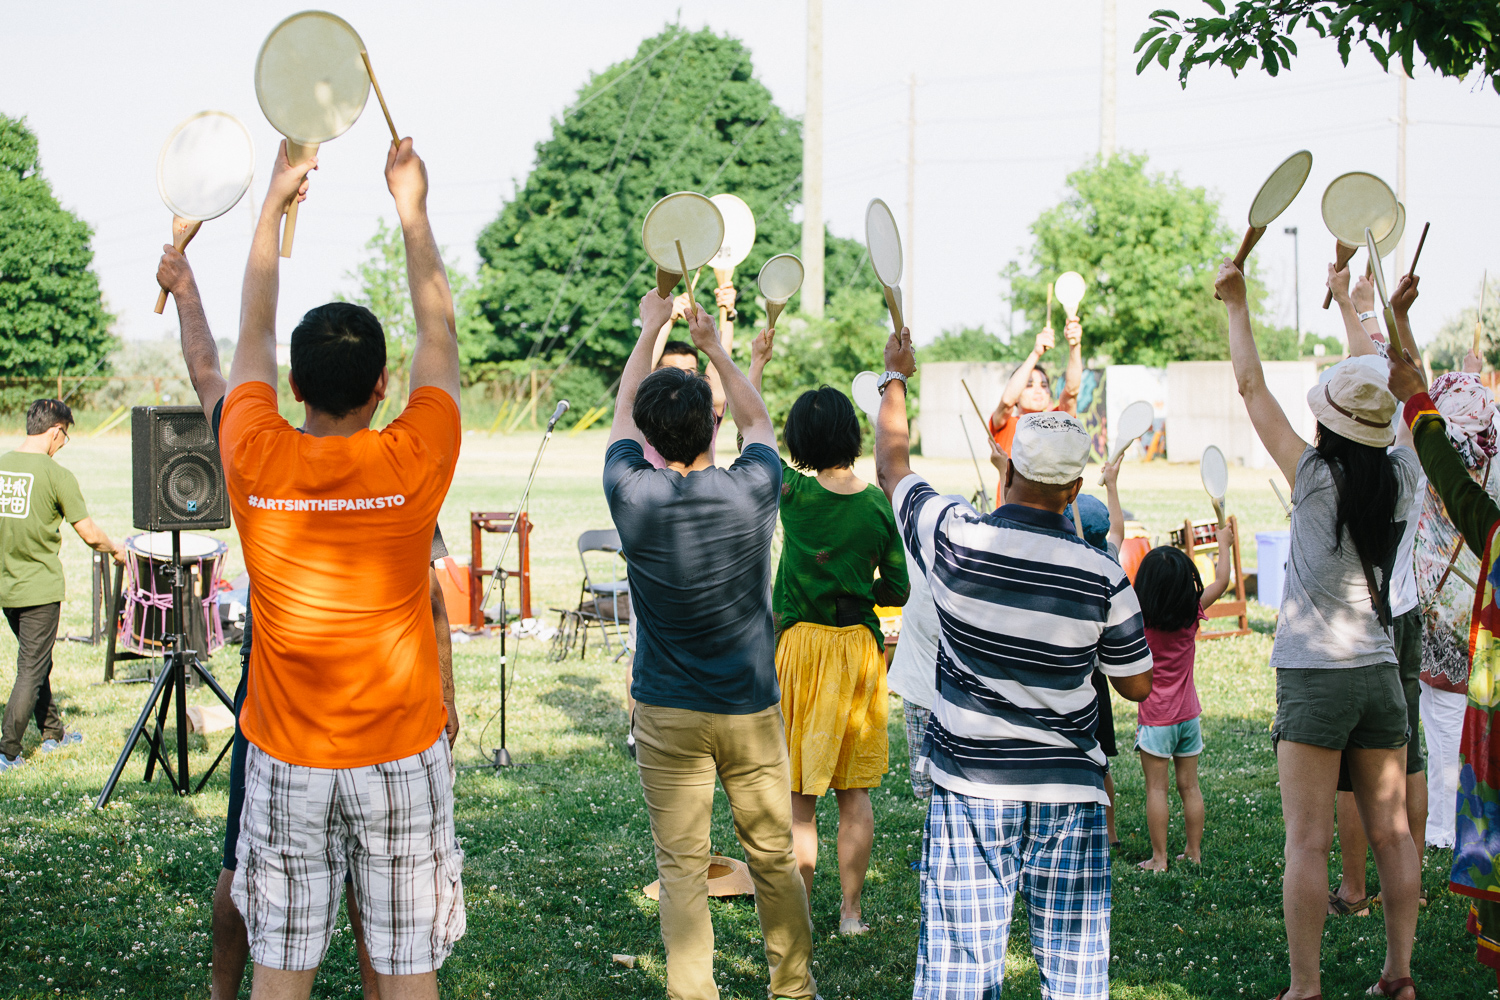 A group of audience members stand and raise hand drums above their head as they participate in a workshop on the grass.